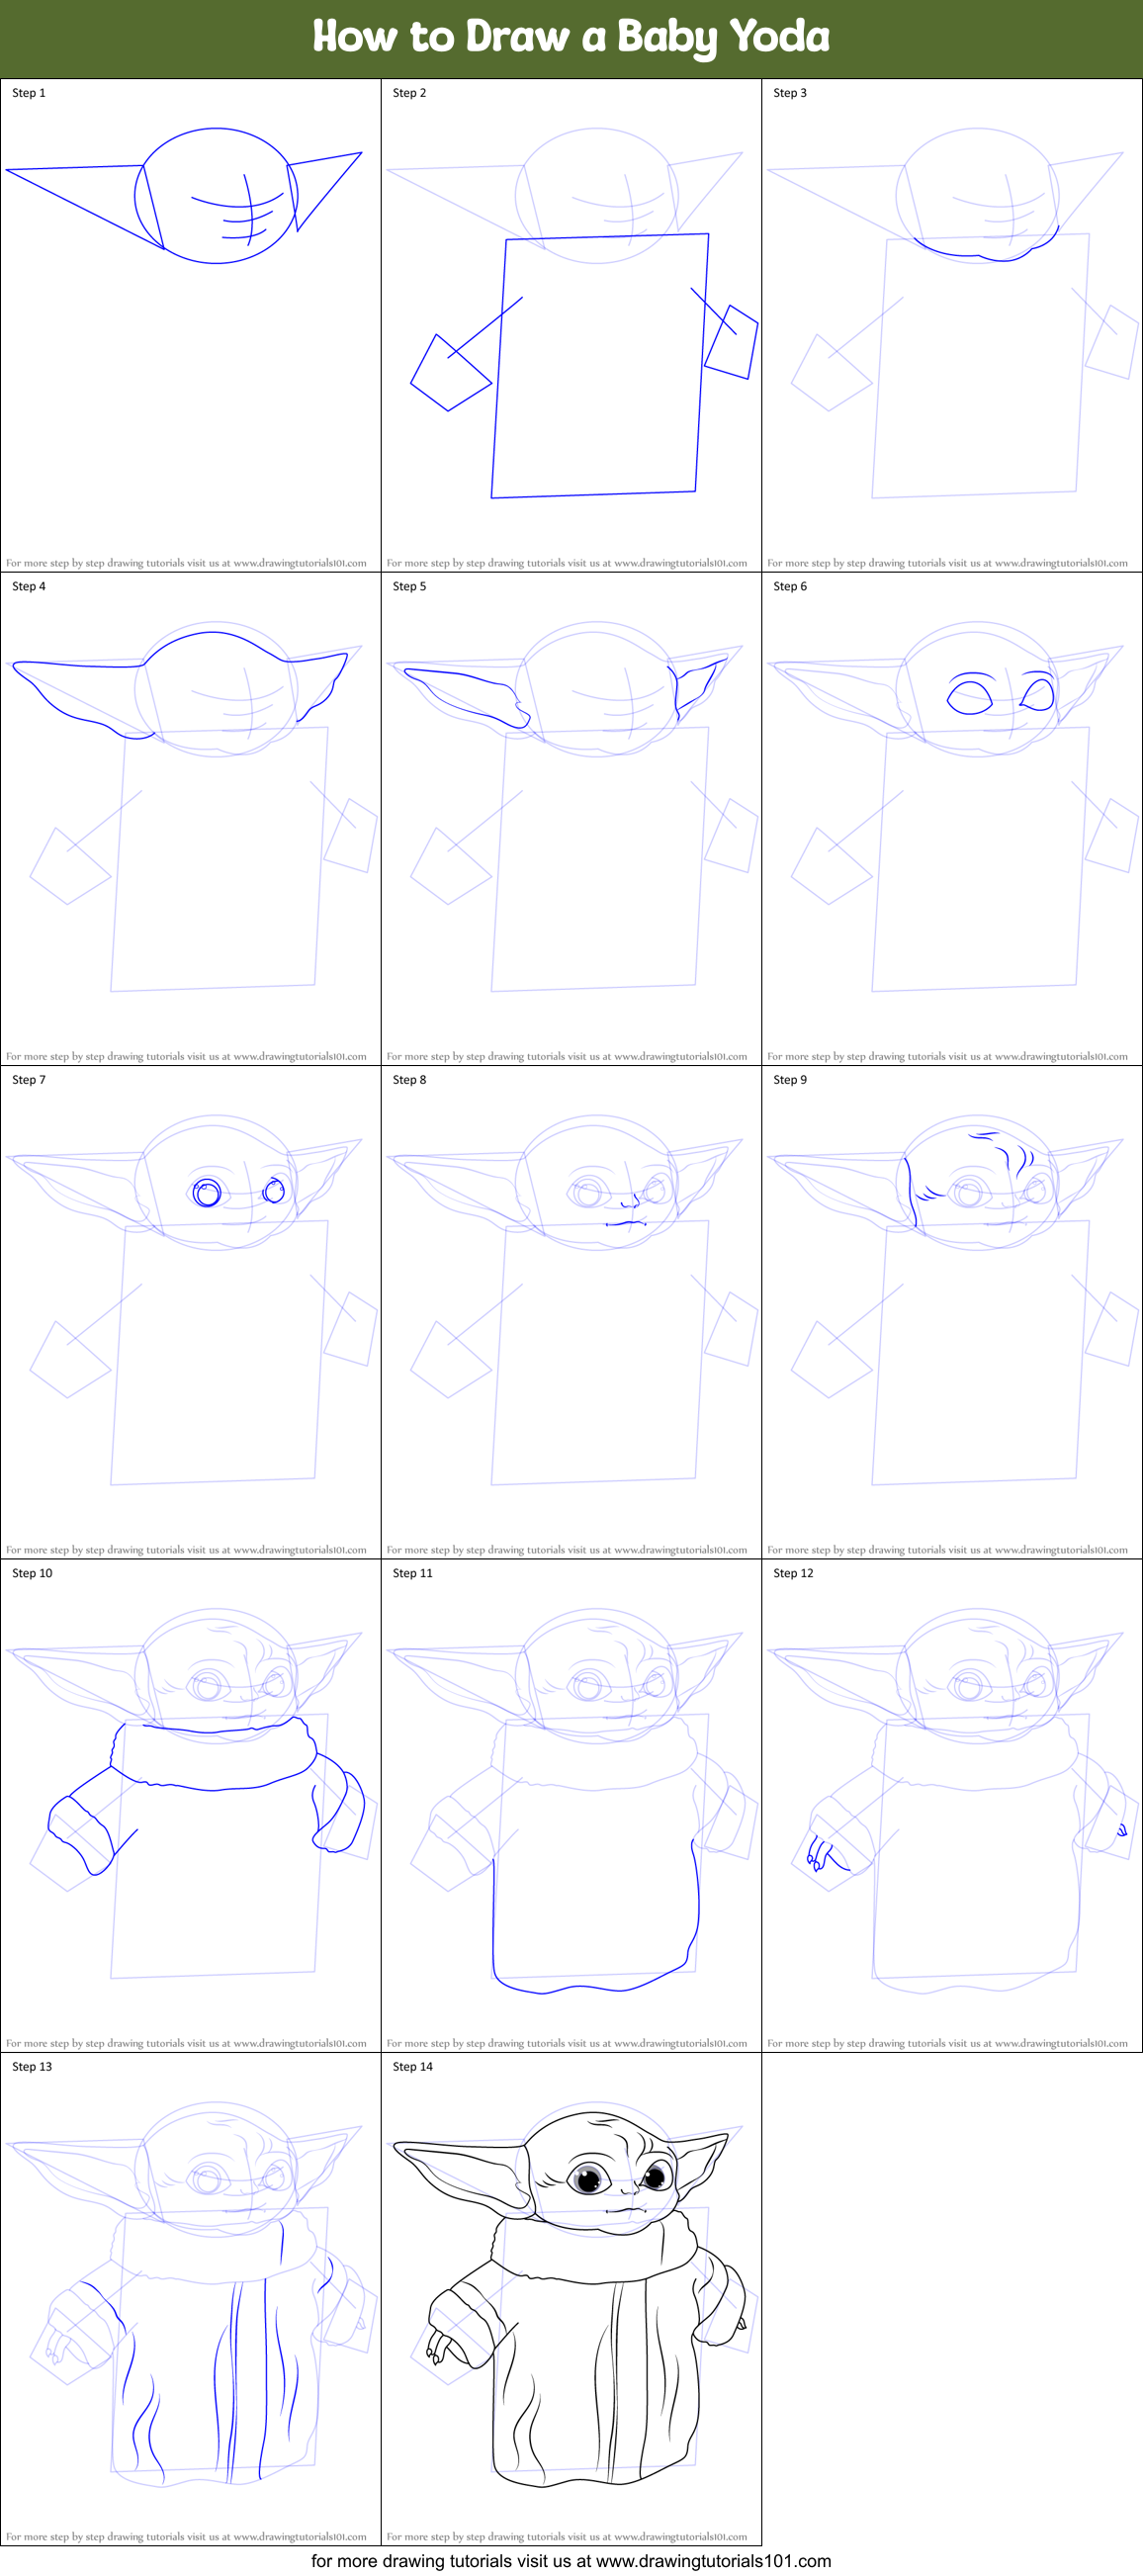 How to Draw a Baby Yoda printable step by step drawing sheet